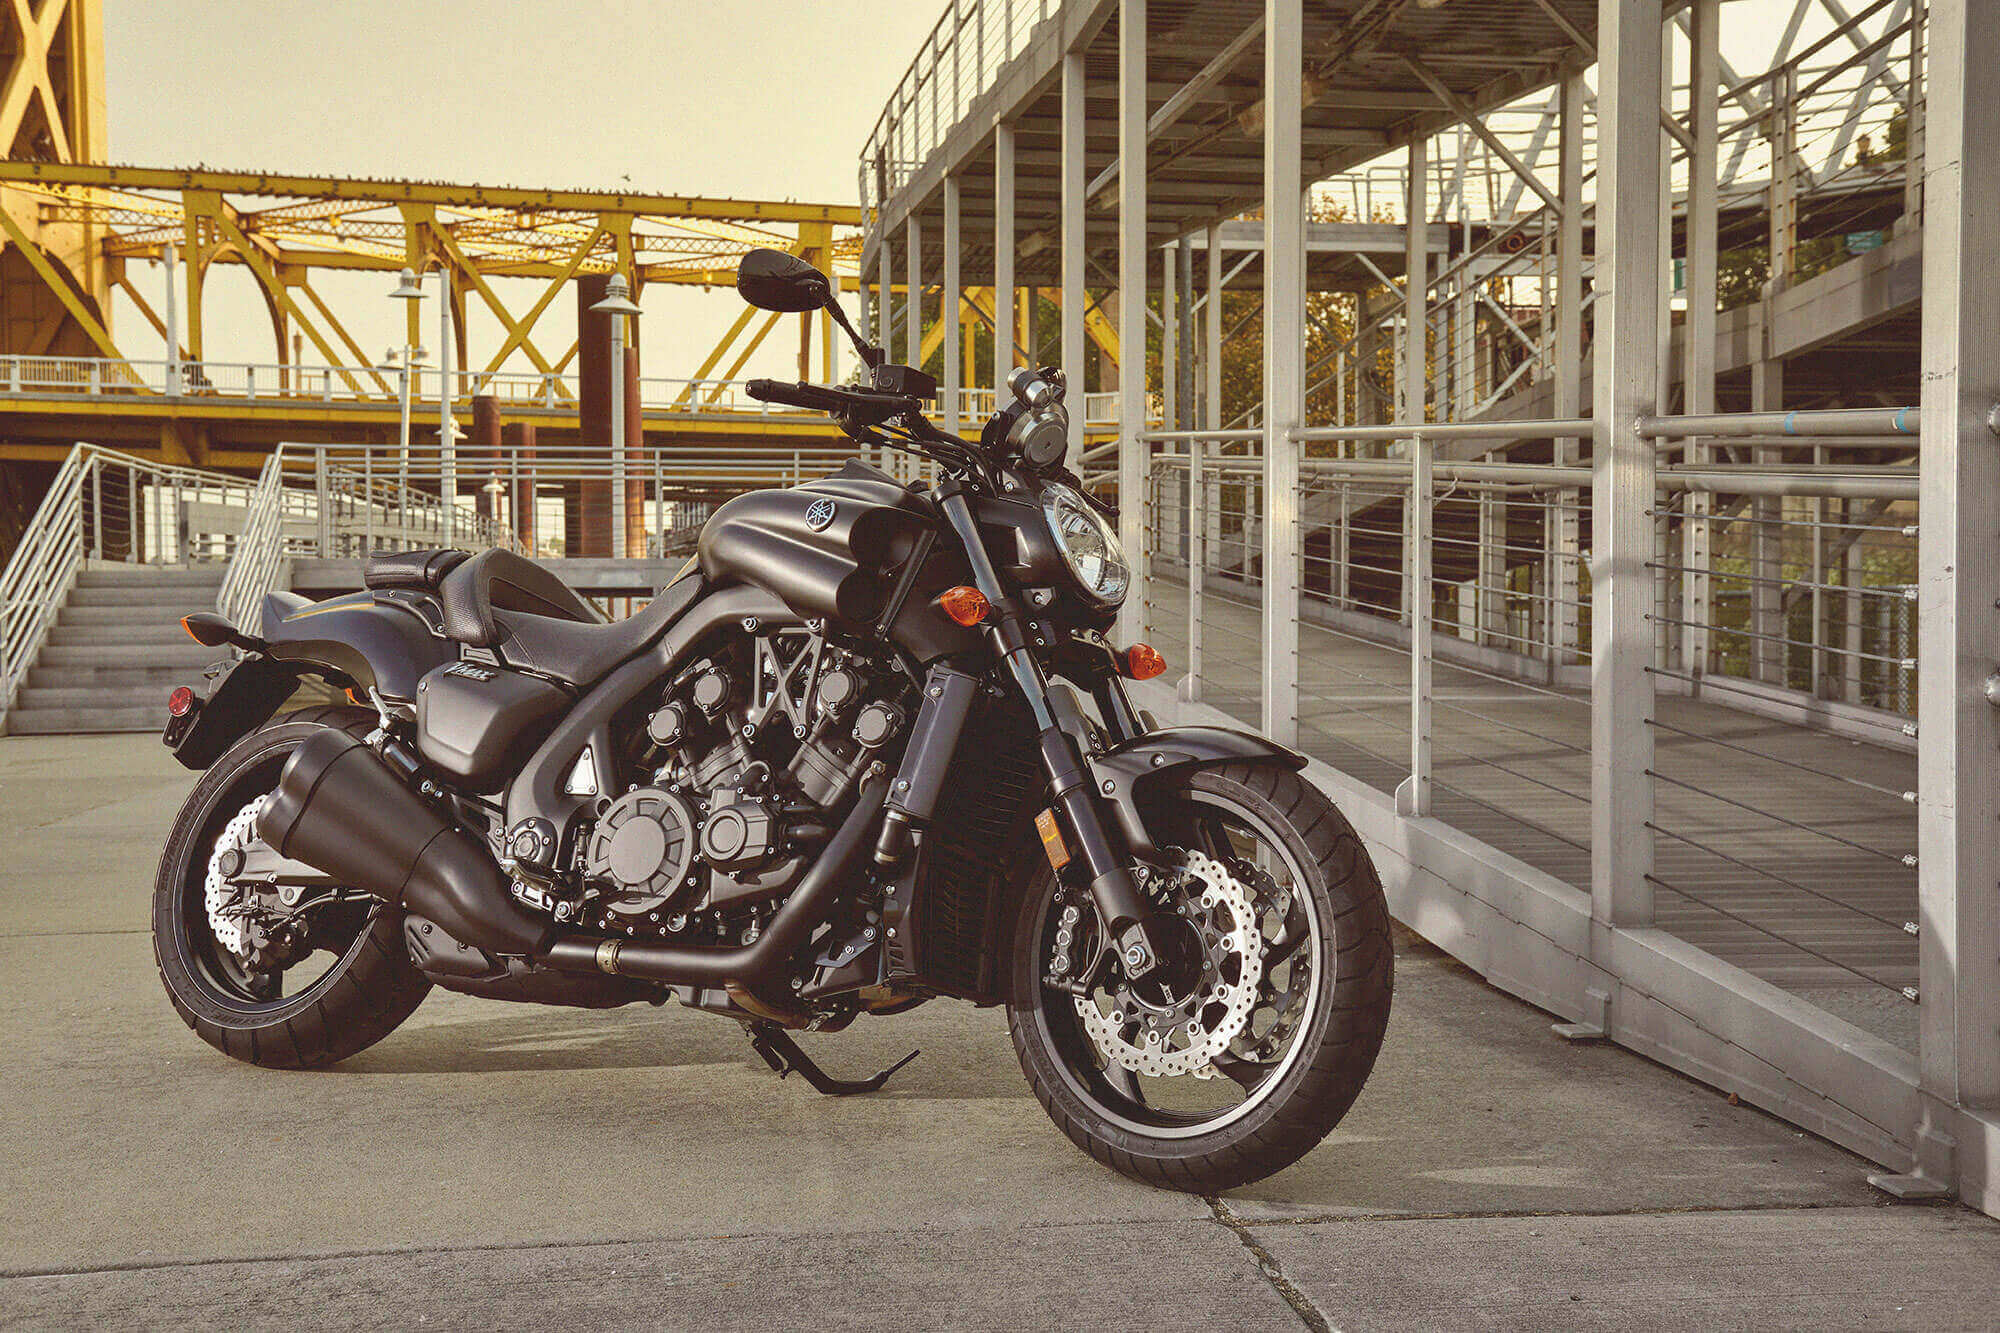 Yamaha VMAX parked in a dock